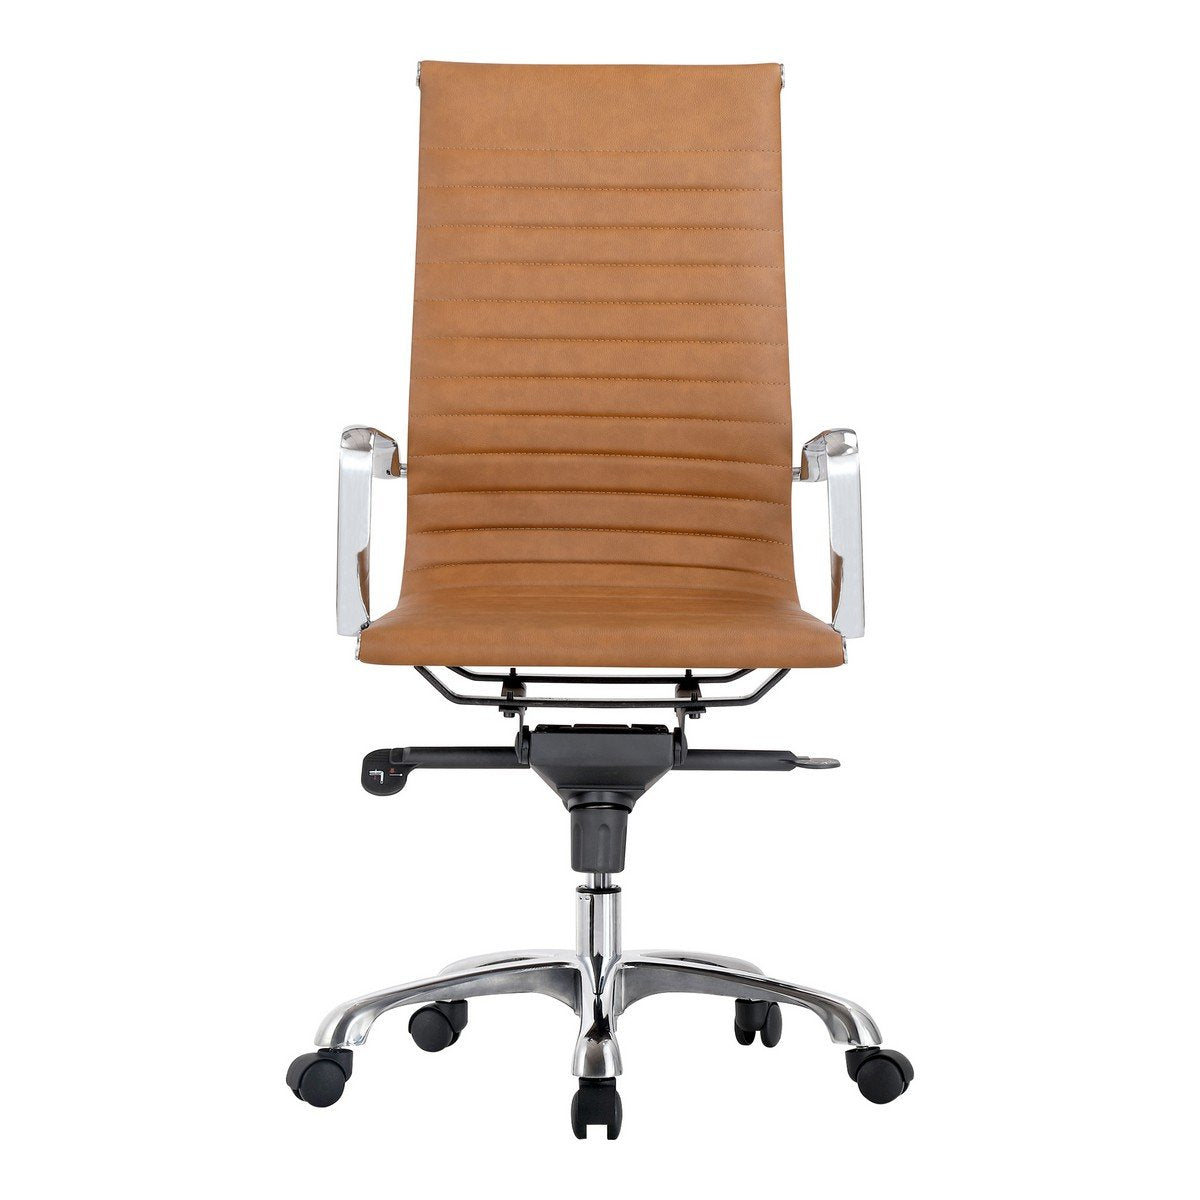 Moe's Home Collection Omega Swivel office Chair High Back Tan - ZM-1001-40 - Moe's Home Collection - Office Chairs - Minimal And Modern - 1